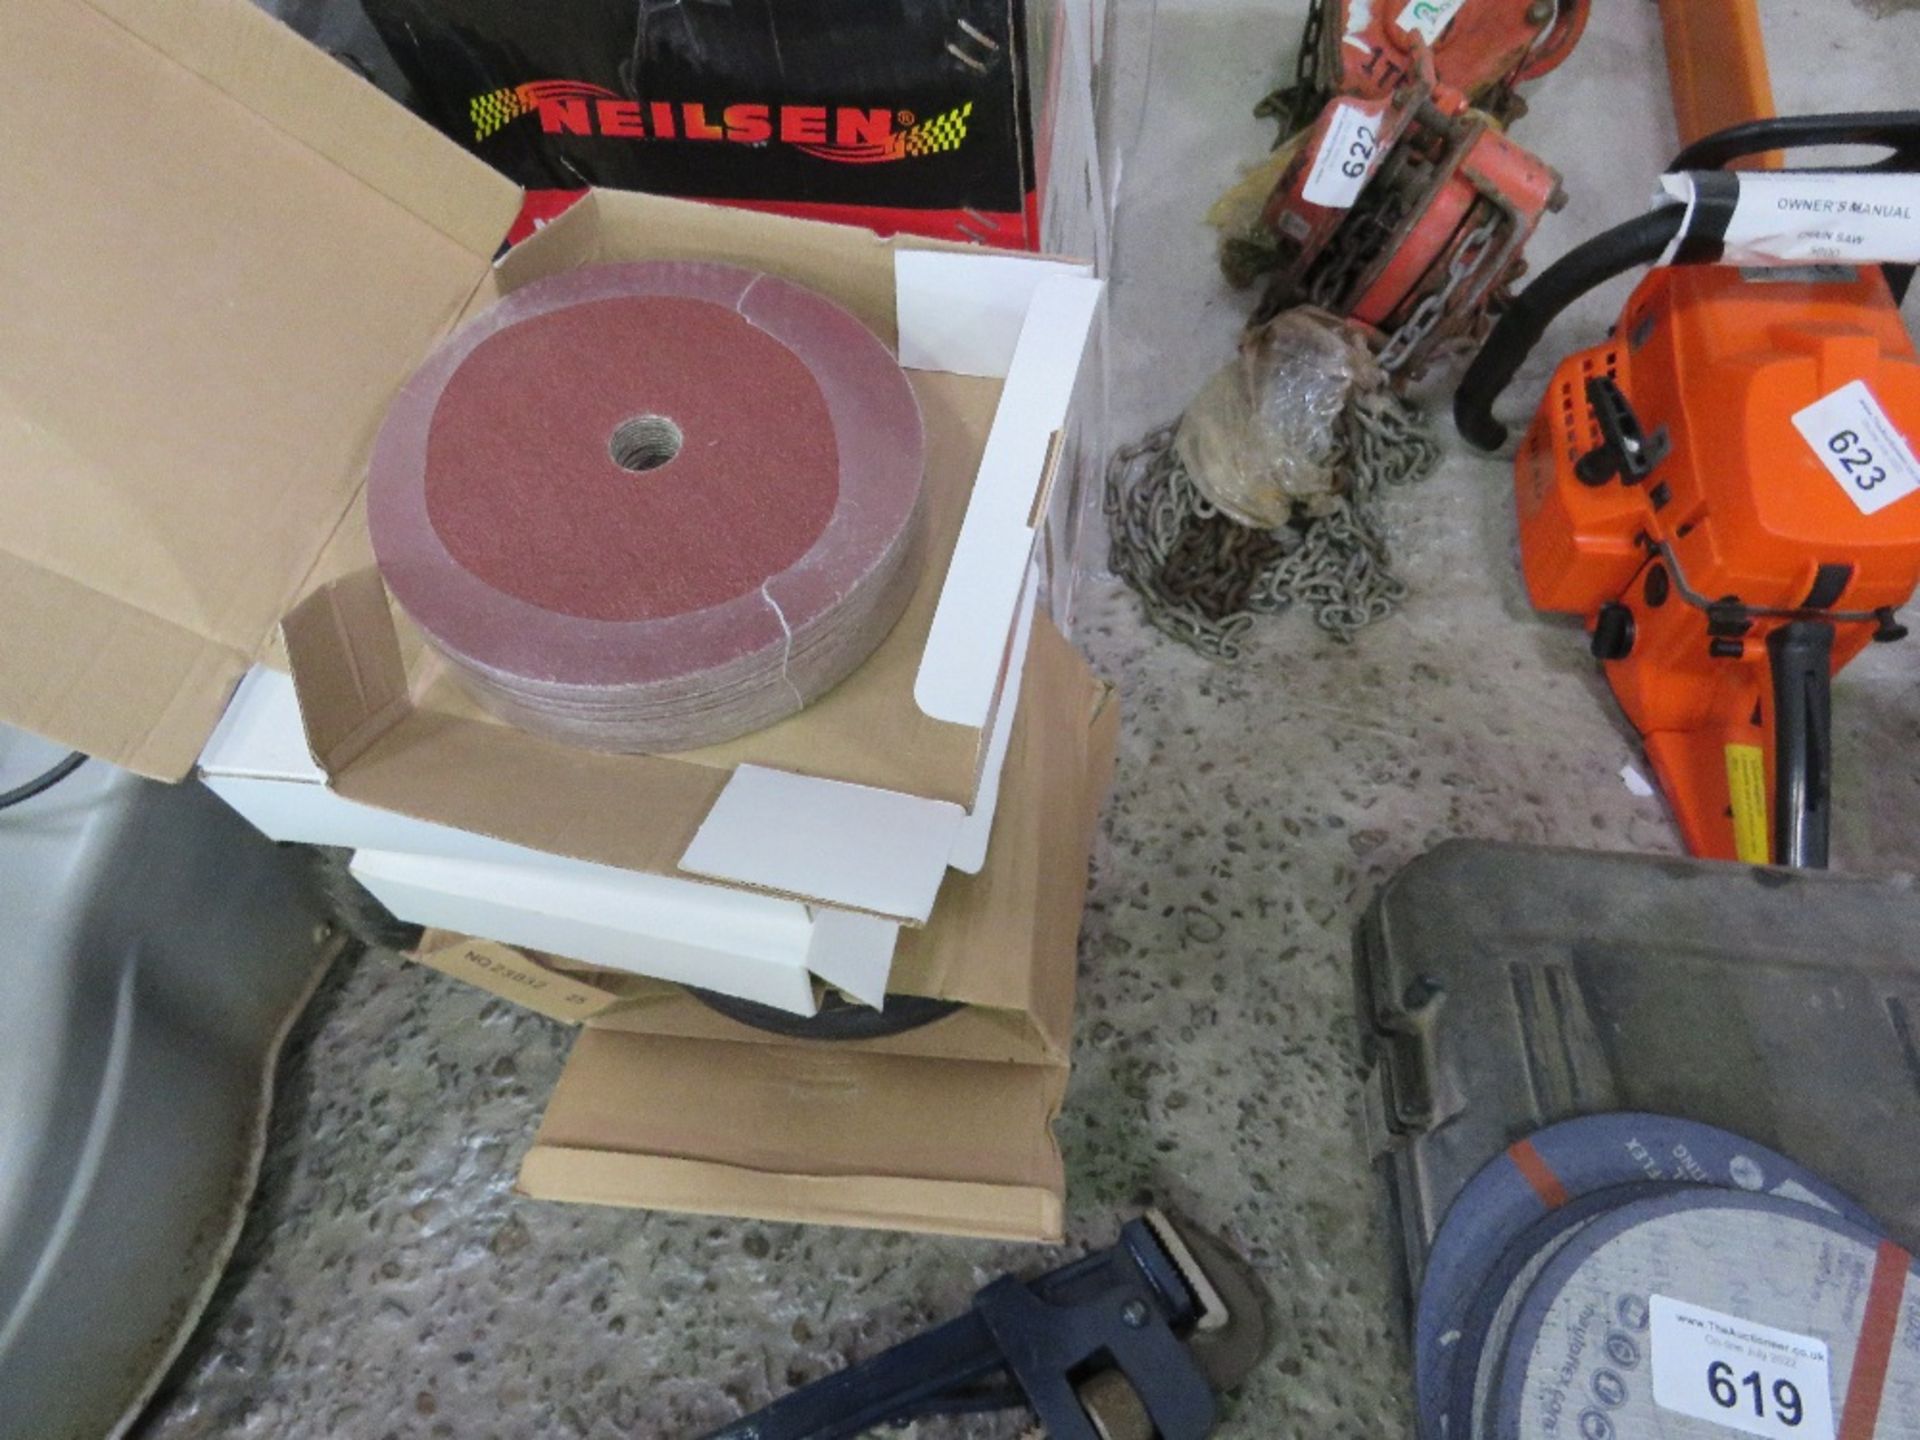 5 X BOXES OF SANDING DISCS PLUS 2 X BOXES OF METAL CUTTING DISCS. - Image 3 of 3